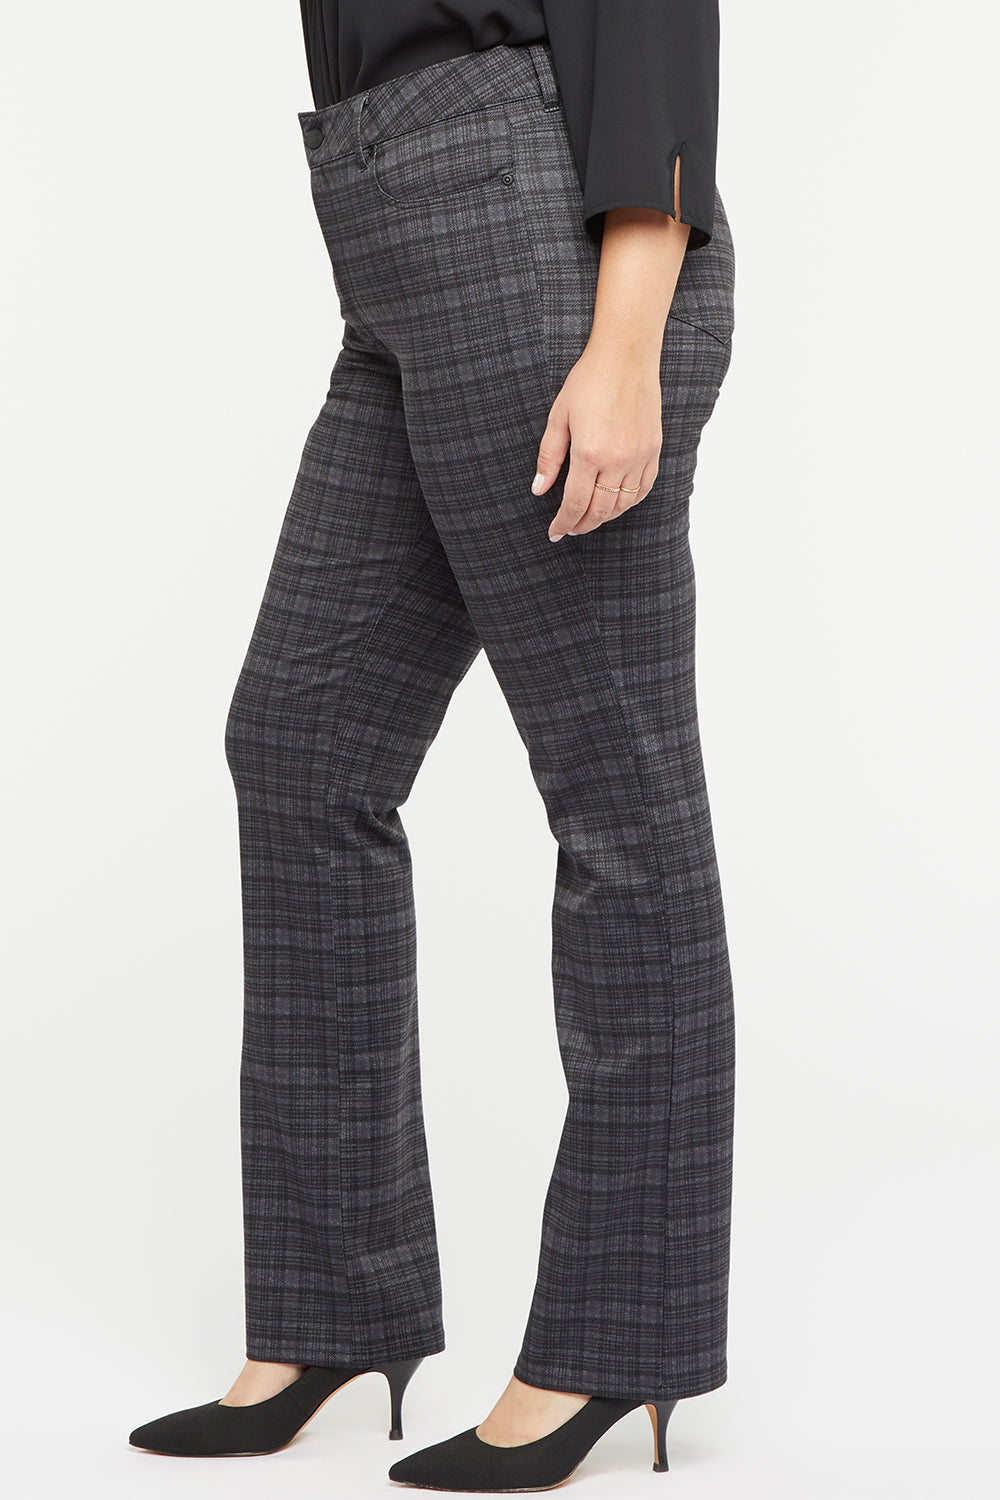 Marilyn Straight Pants In Plus Size In Ponte Knit - Hudson Plaid Grey ...